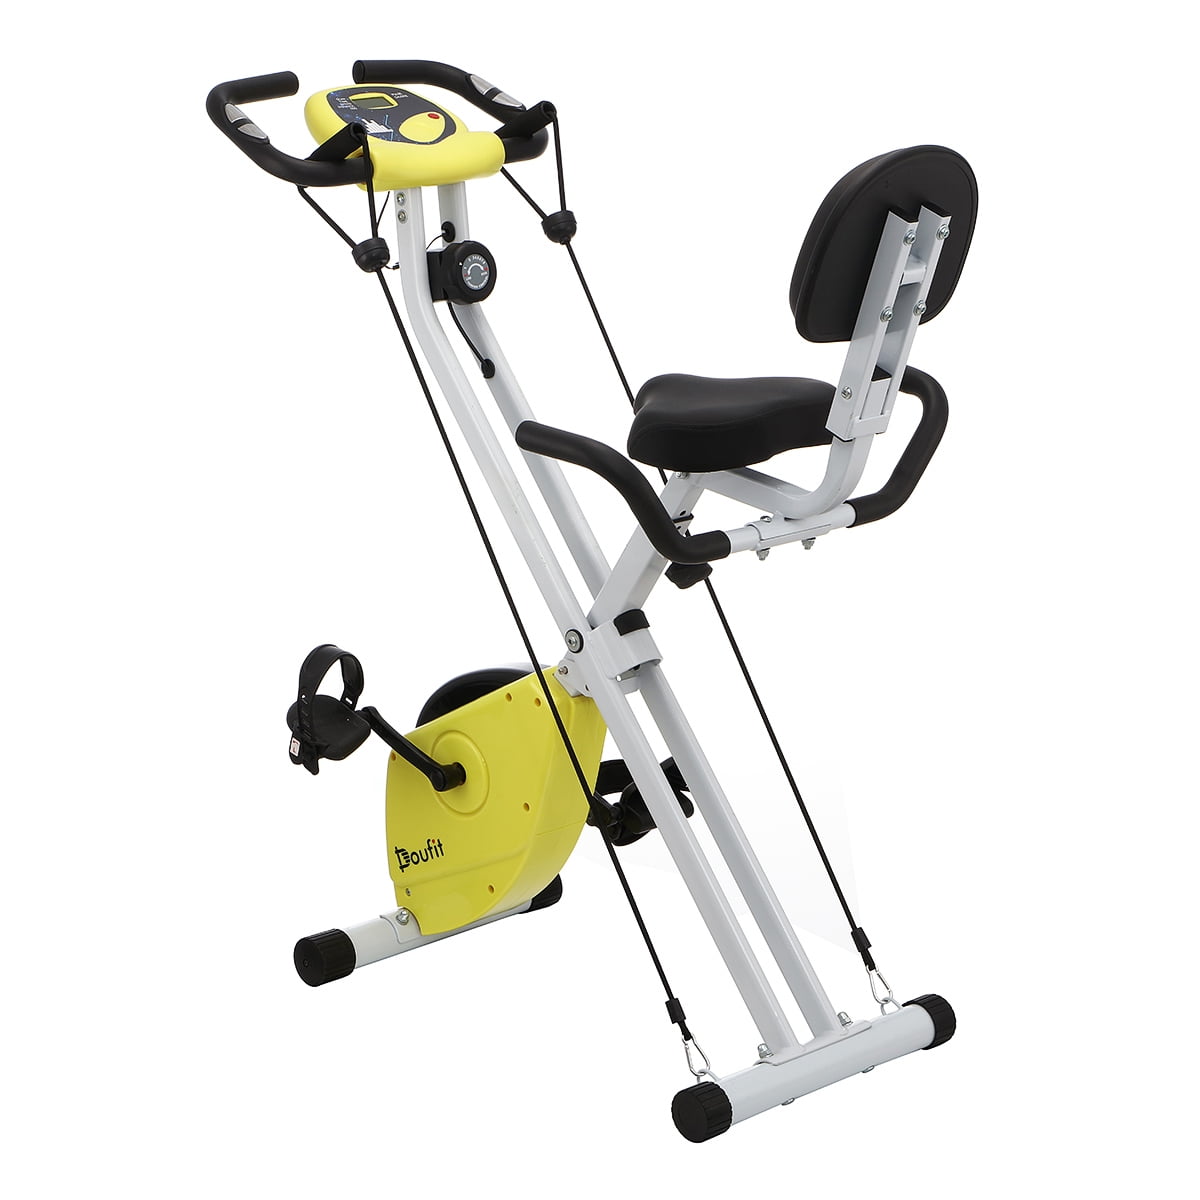 DOUFIT Foldable Stationary Upright Magnetic Exercise Bike Workout Indoor Cycling 